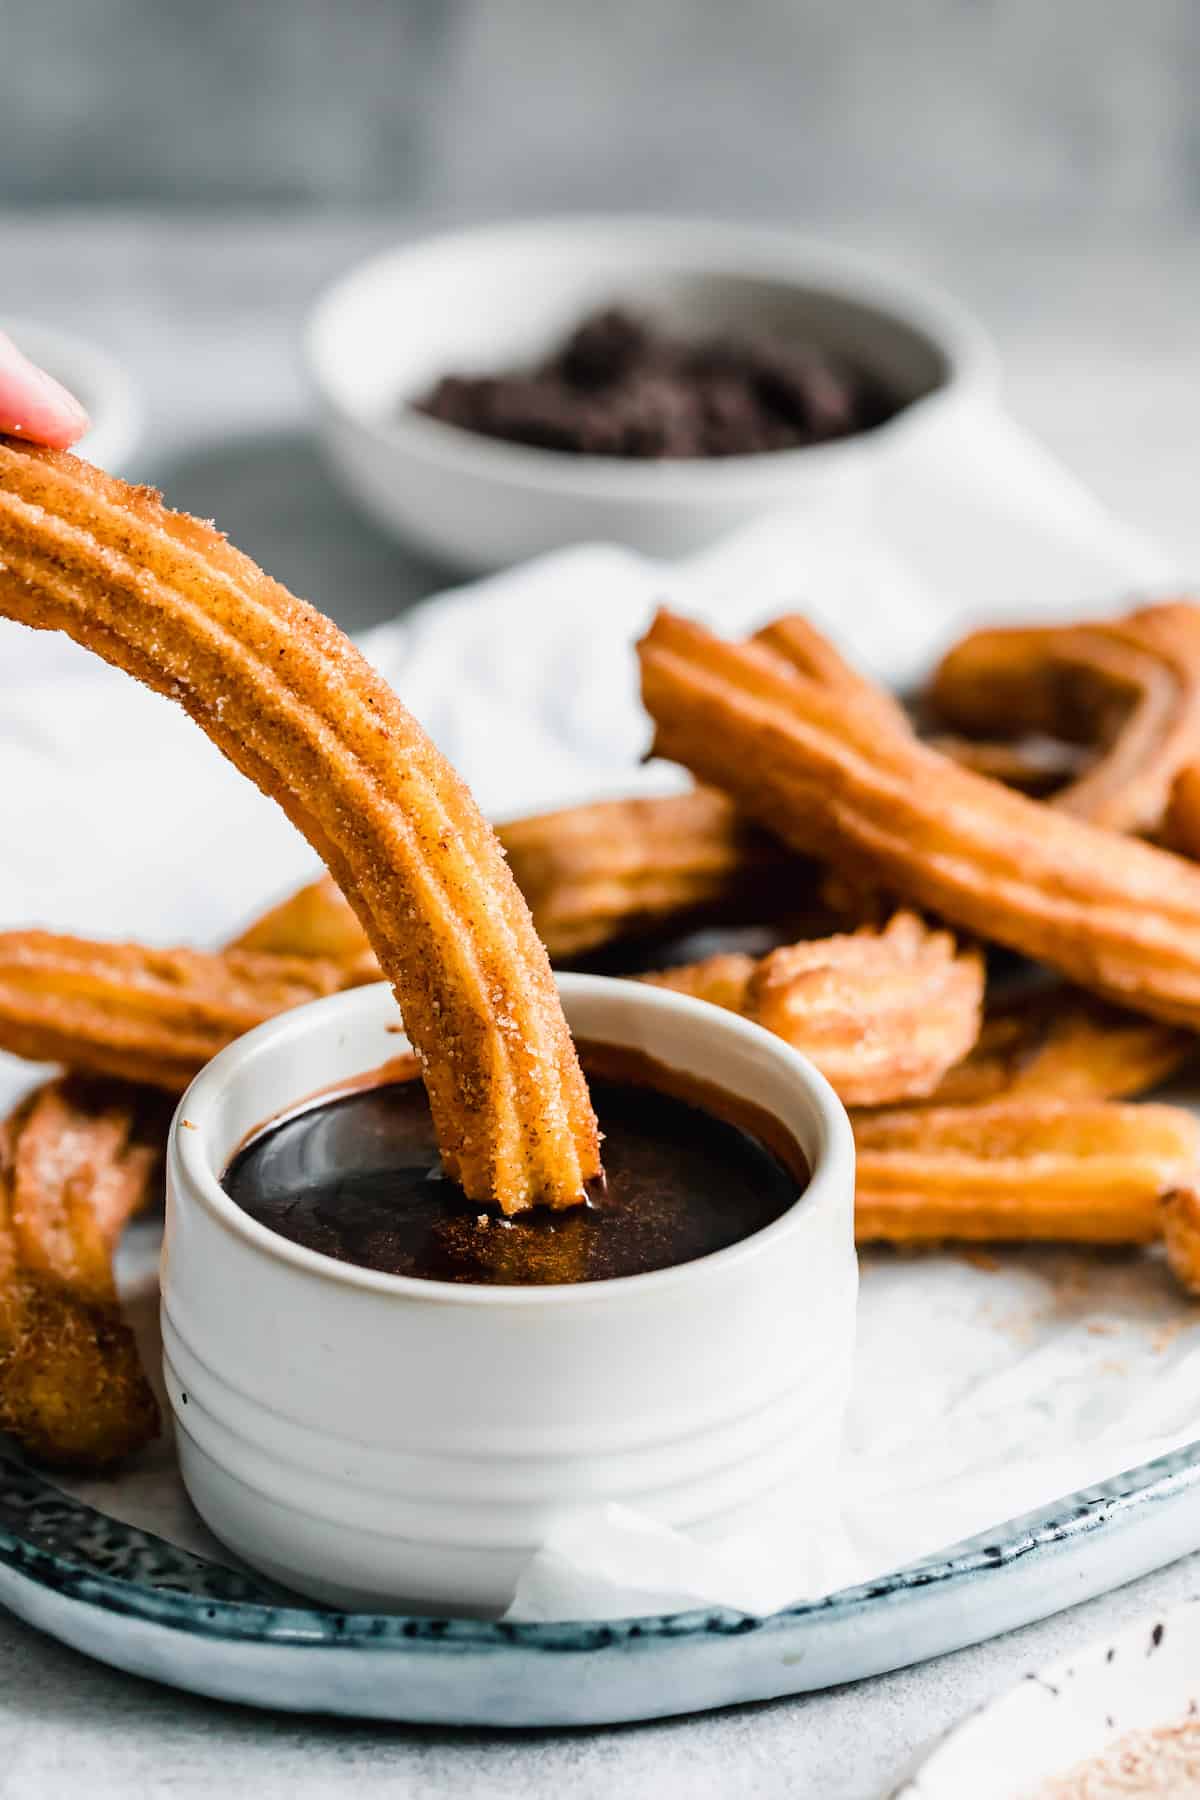 A Hand Dunking a Churro Into the Chocolate Dipping Sauce